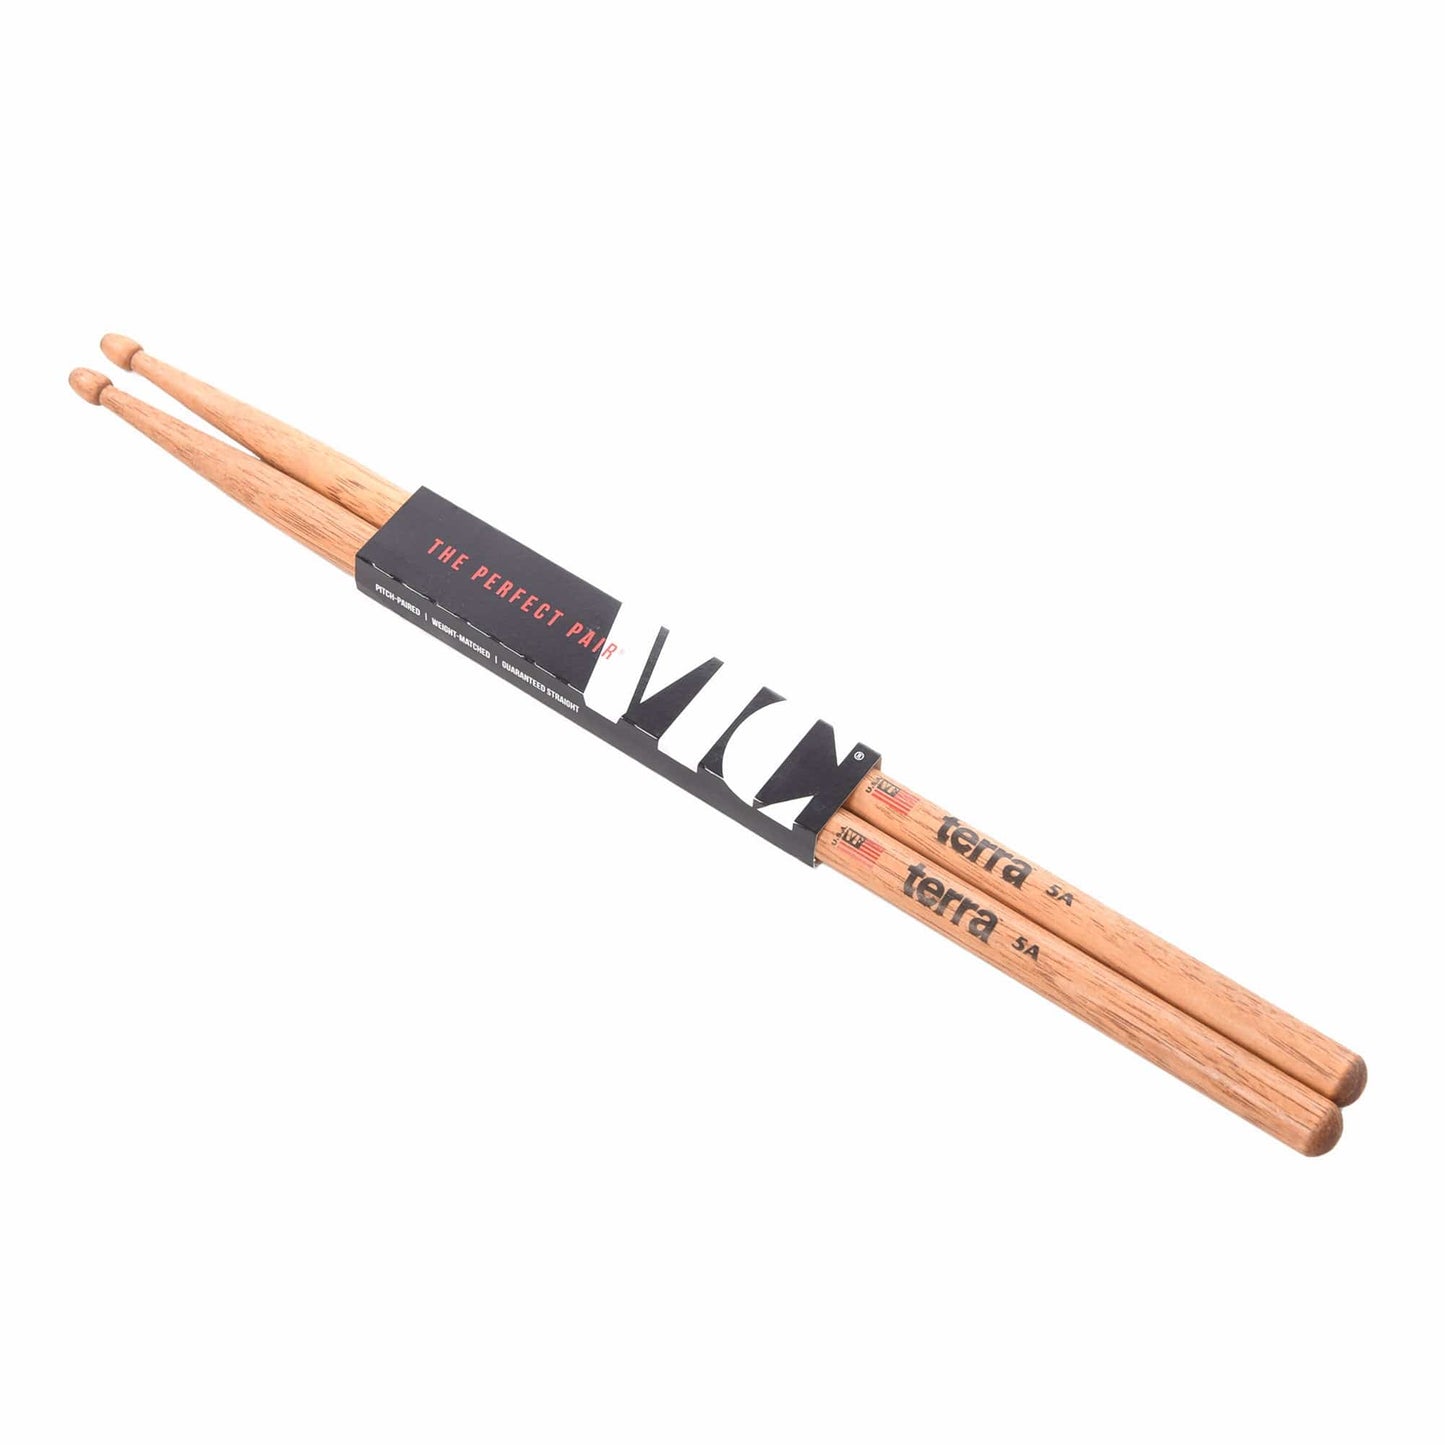 Vic Firth American Classic 5AT Terra Wood Tip Drum Sticks Drums and Percussion / Parts and Accessories / Drum Sticks and Mallets